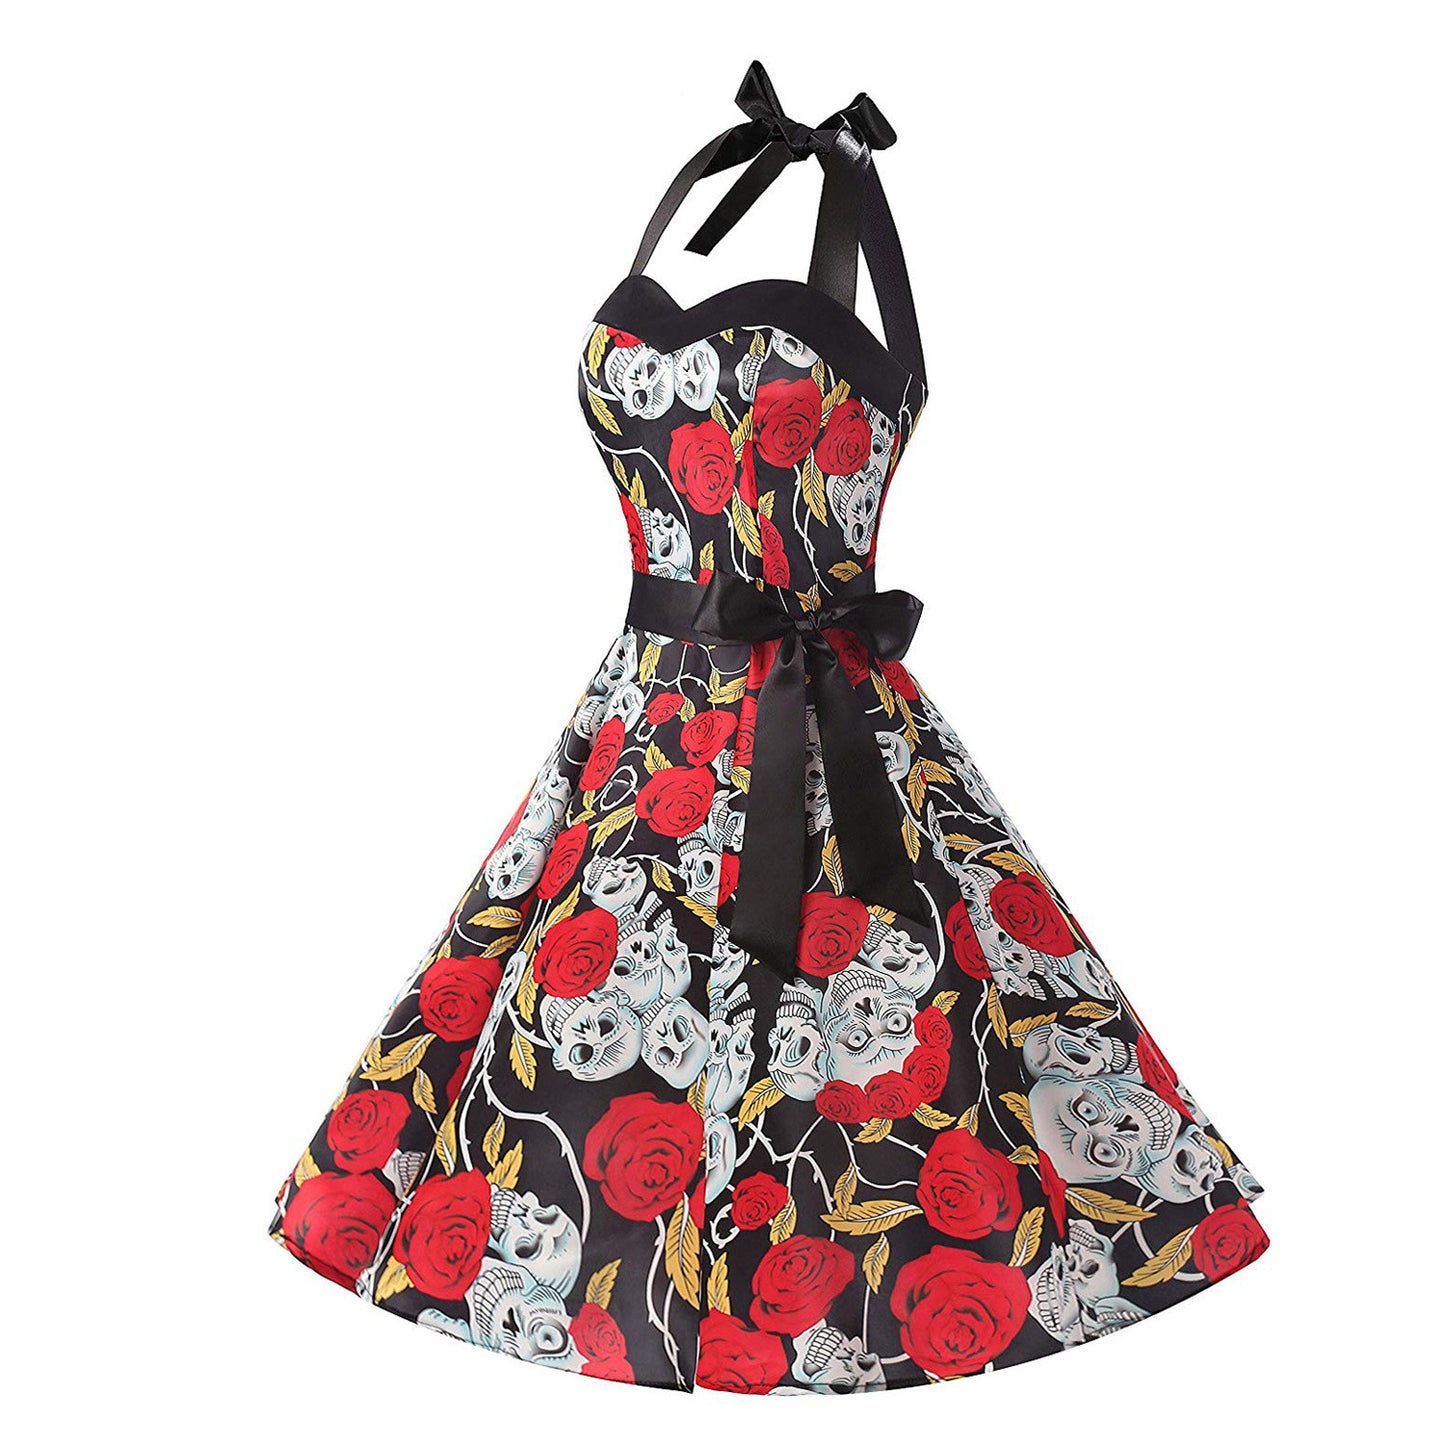 A Gothic-style "The Hepburn Haunt - Halloween Easter Hepburn Dress" adorned with roses.